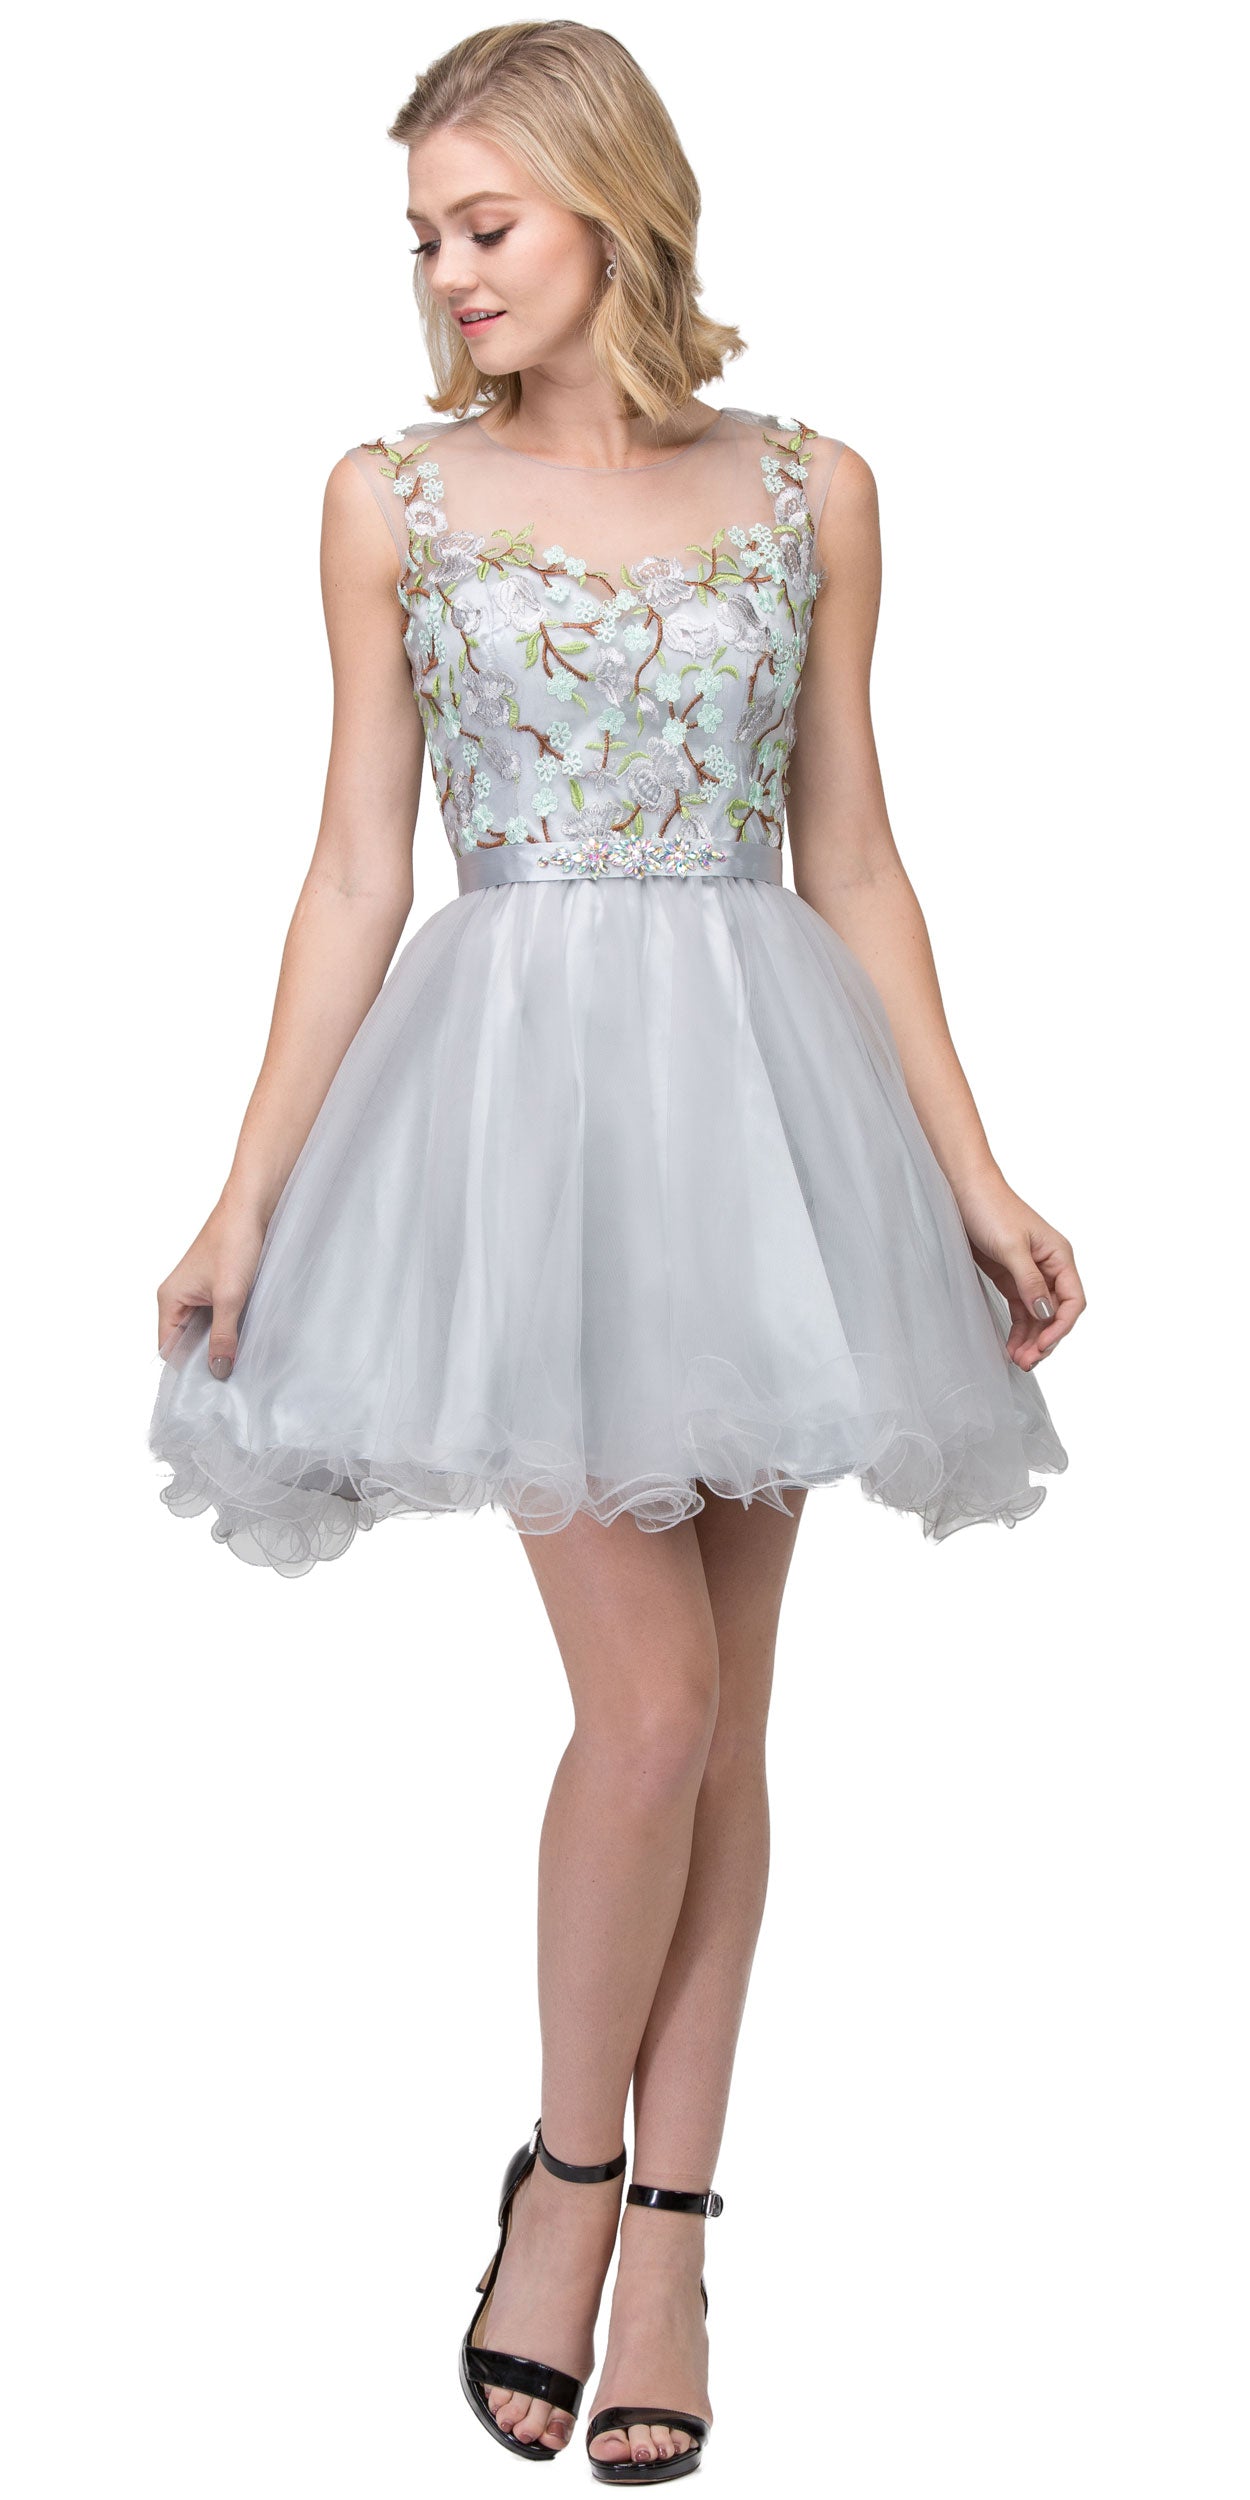 Main image of Floral Embroidery Mesh Top Short Tulle Homecoming Dress